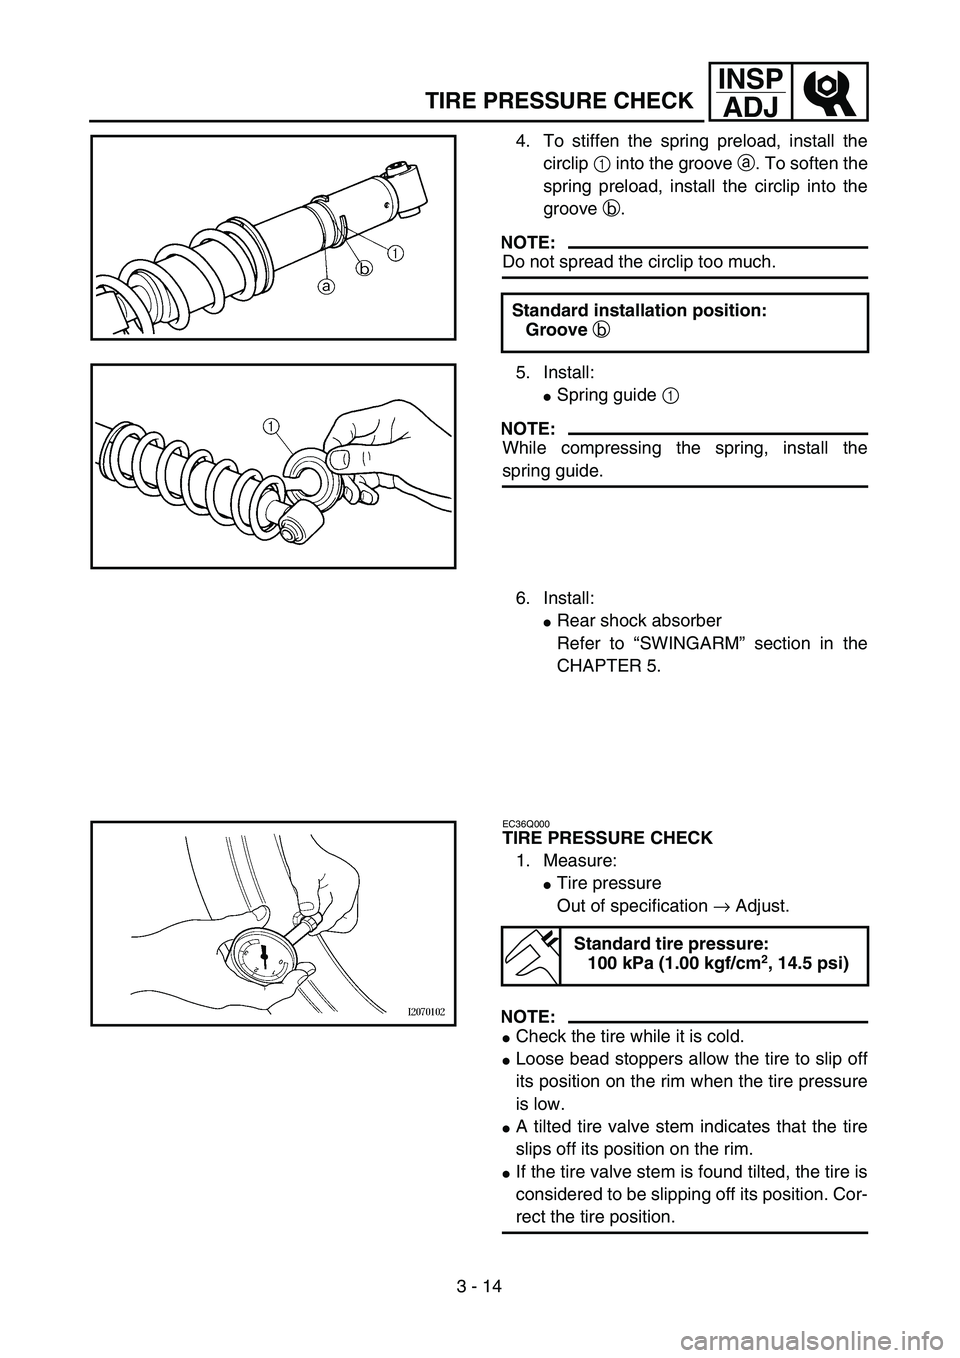 YAMAHA TTR90 2004  Owners Manual 3 - 14
INSP
ADJ
4. To stiffen the spring preload, install the
circlip 1 into the groove a. To soften the
spring preload, install the circlip into the
groove b.
NOTE:
Do not spread the circlip too much